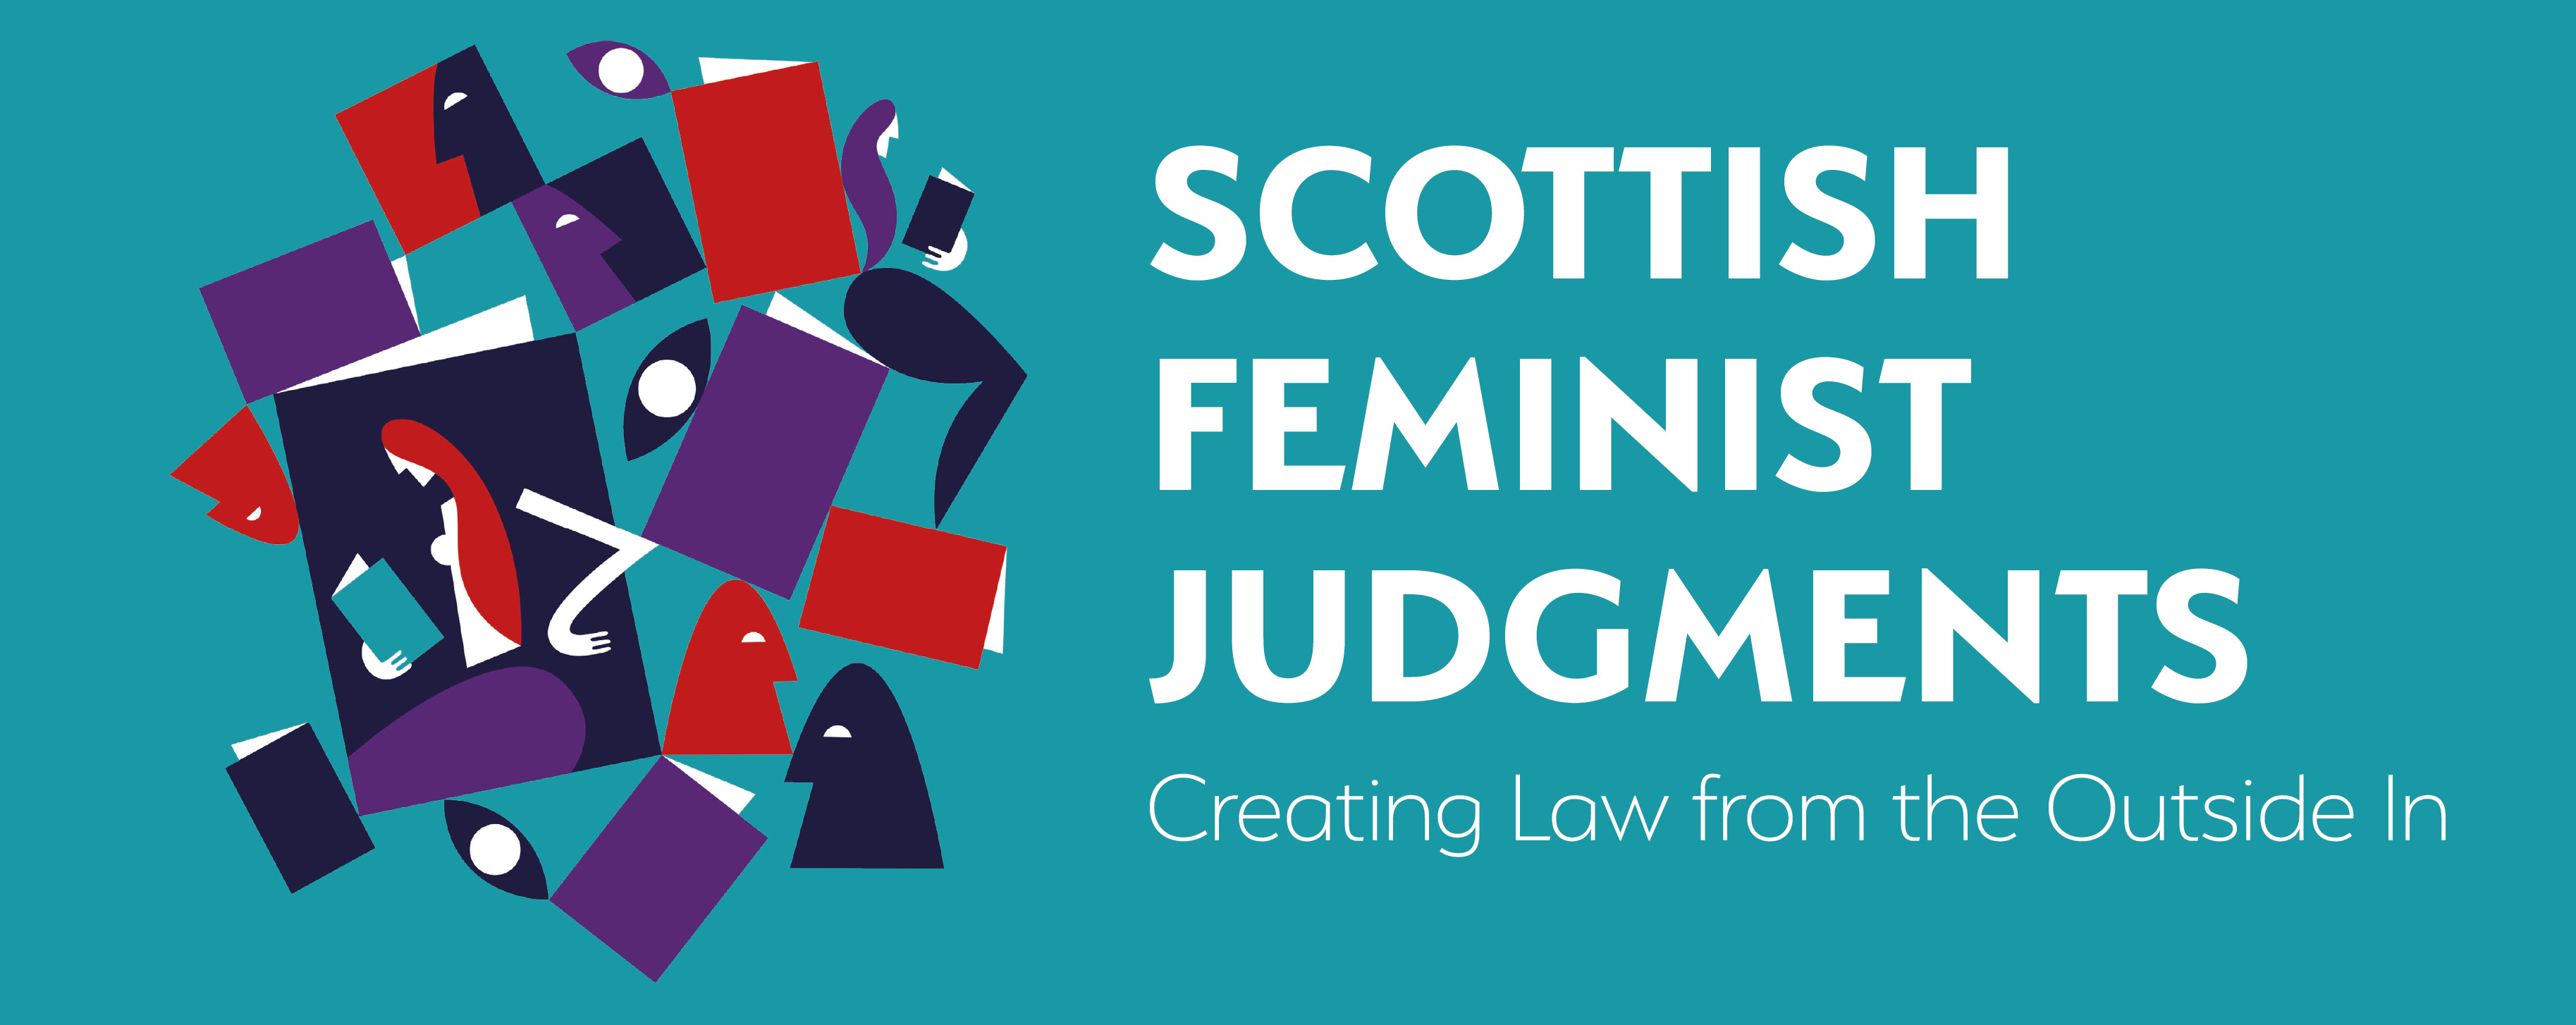 Feminist judgments projects hosts exhibition in Glasgow